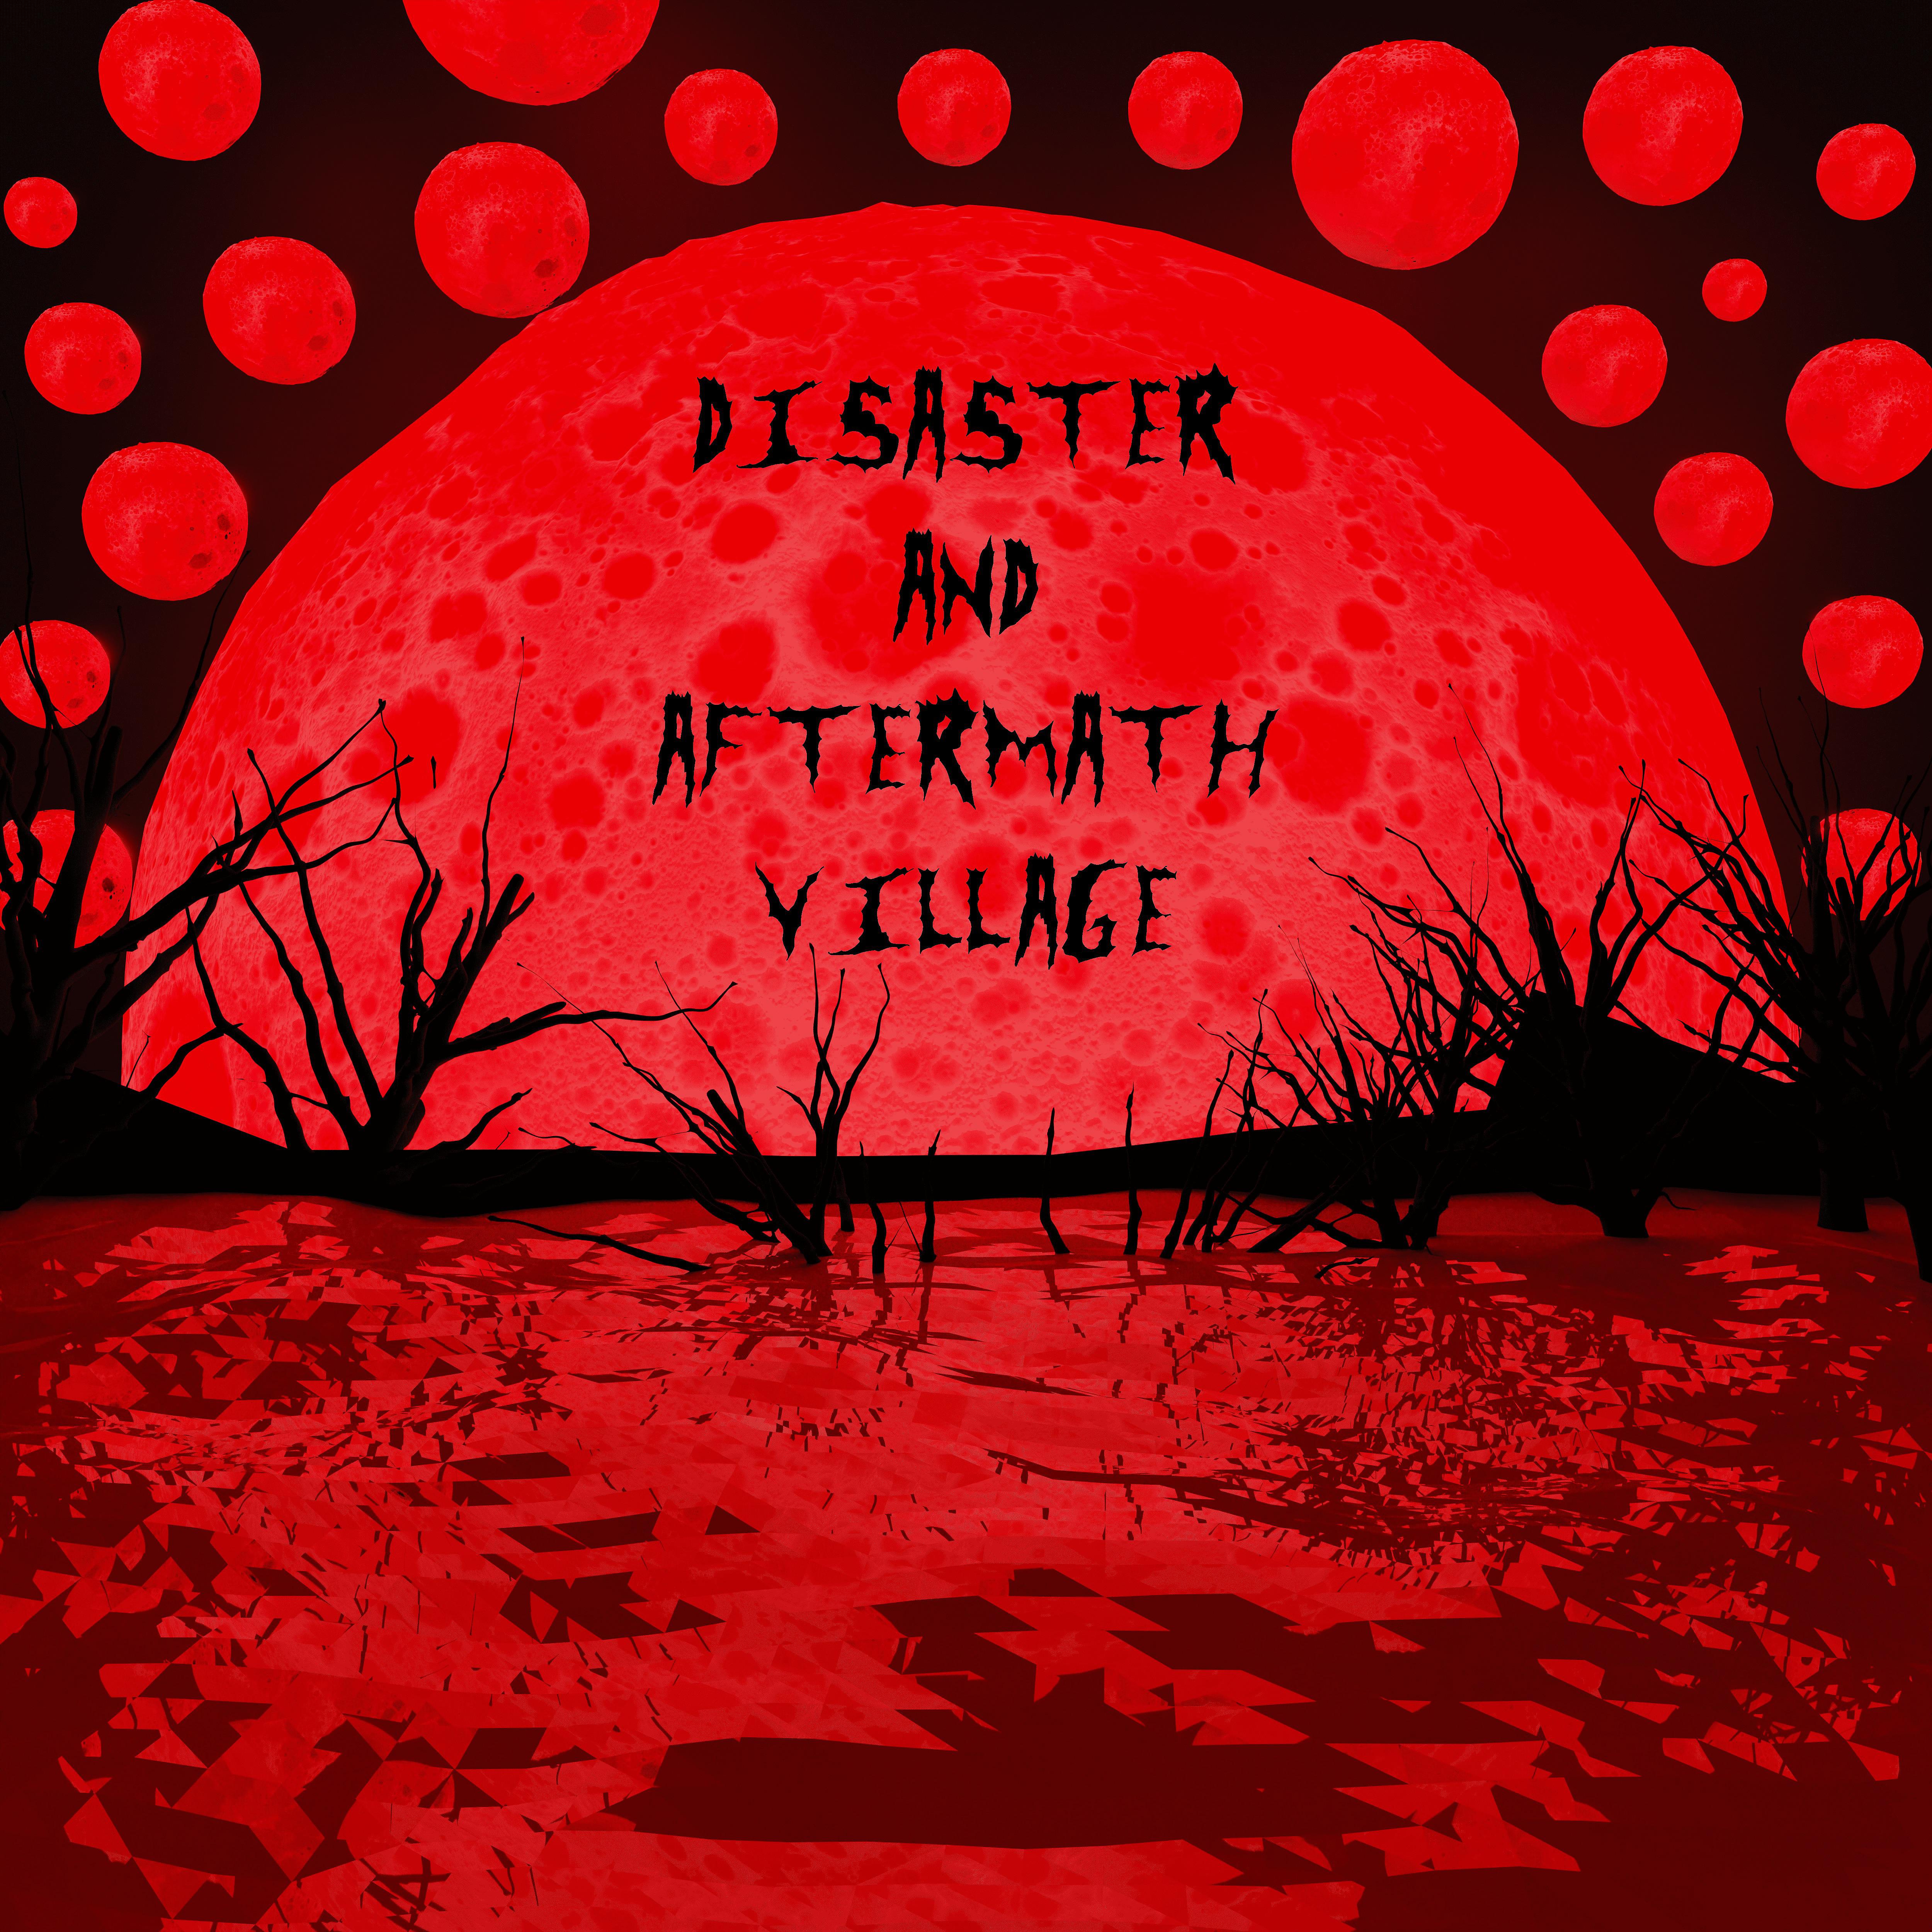 Постер альбома Disaster and Aftermath Village